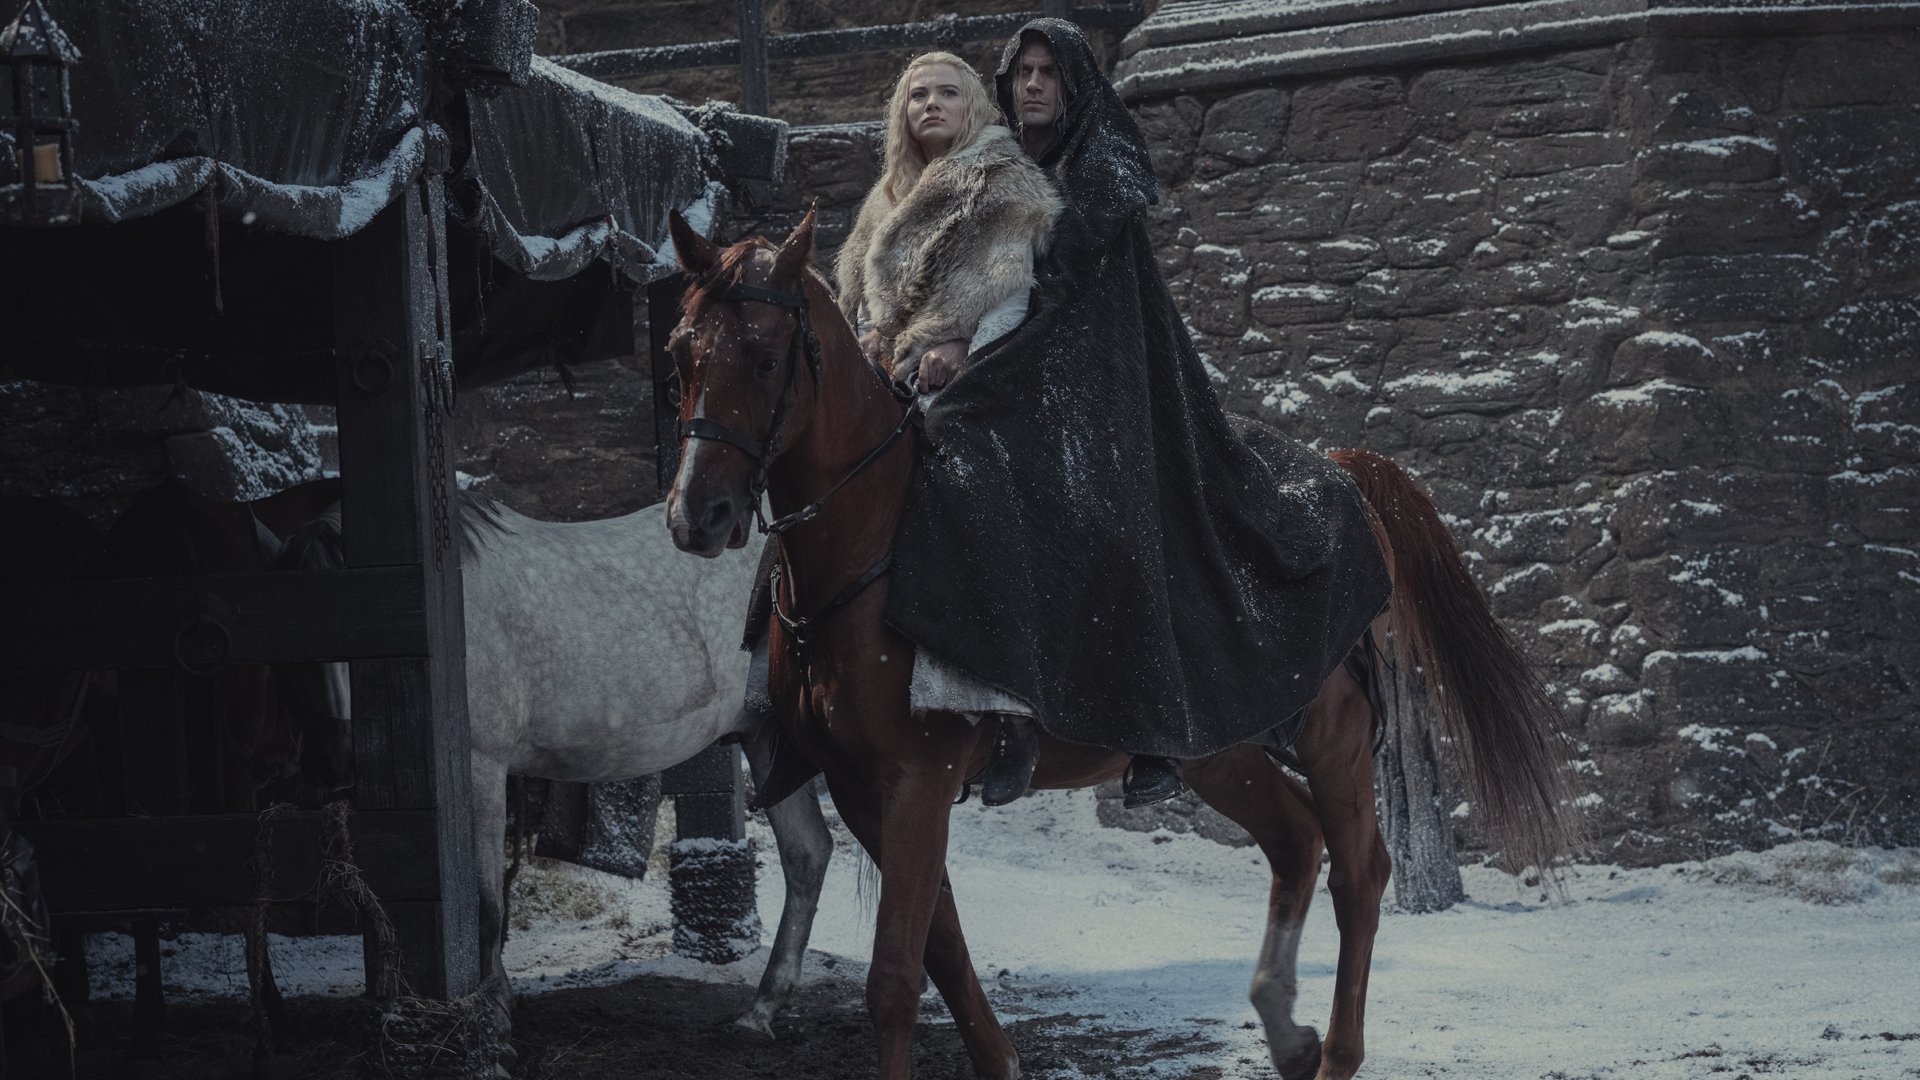 Geralt and Ciri riding Roach in The Witcher season 2 on Netflix